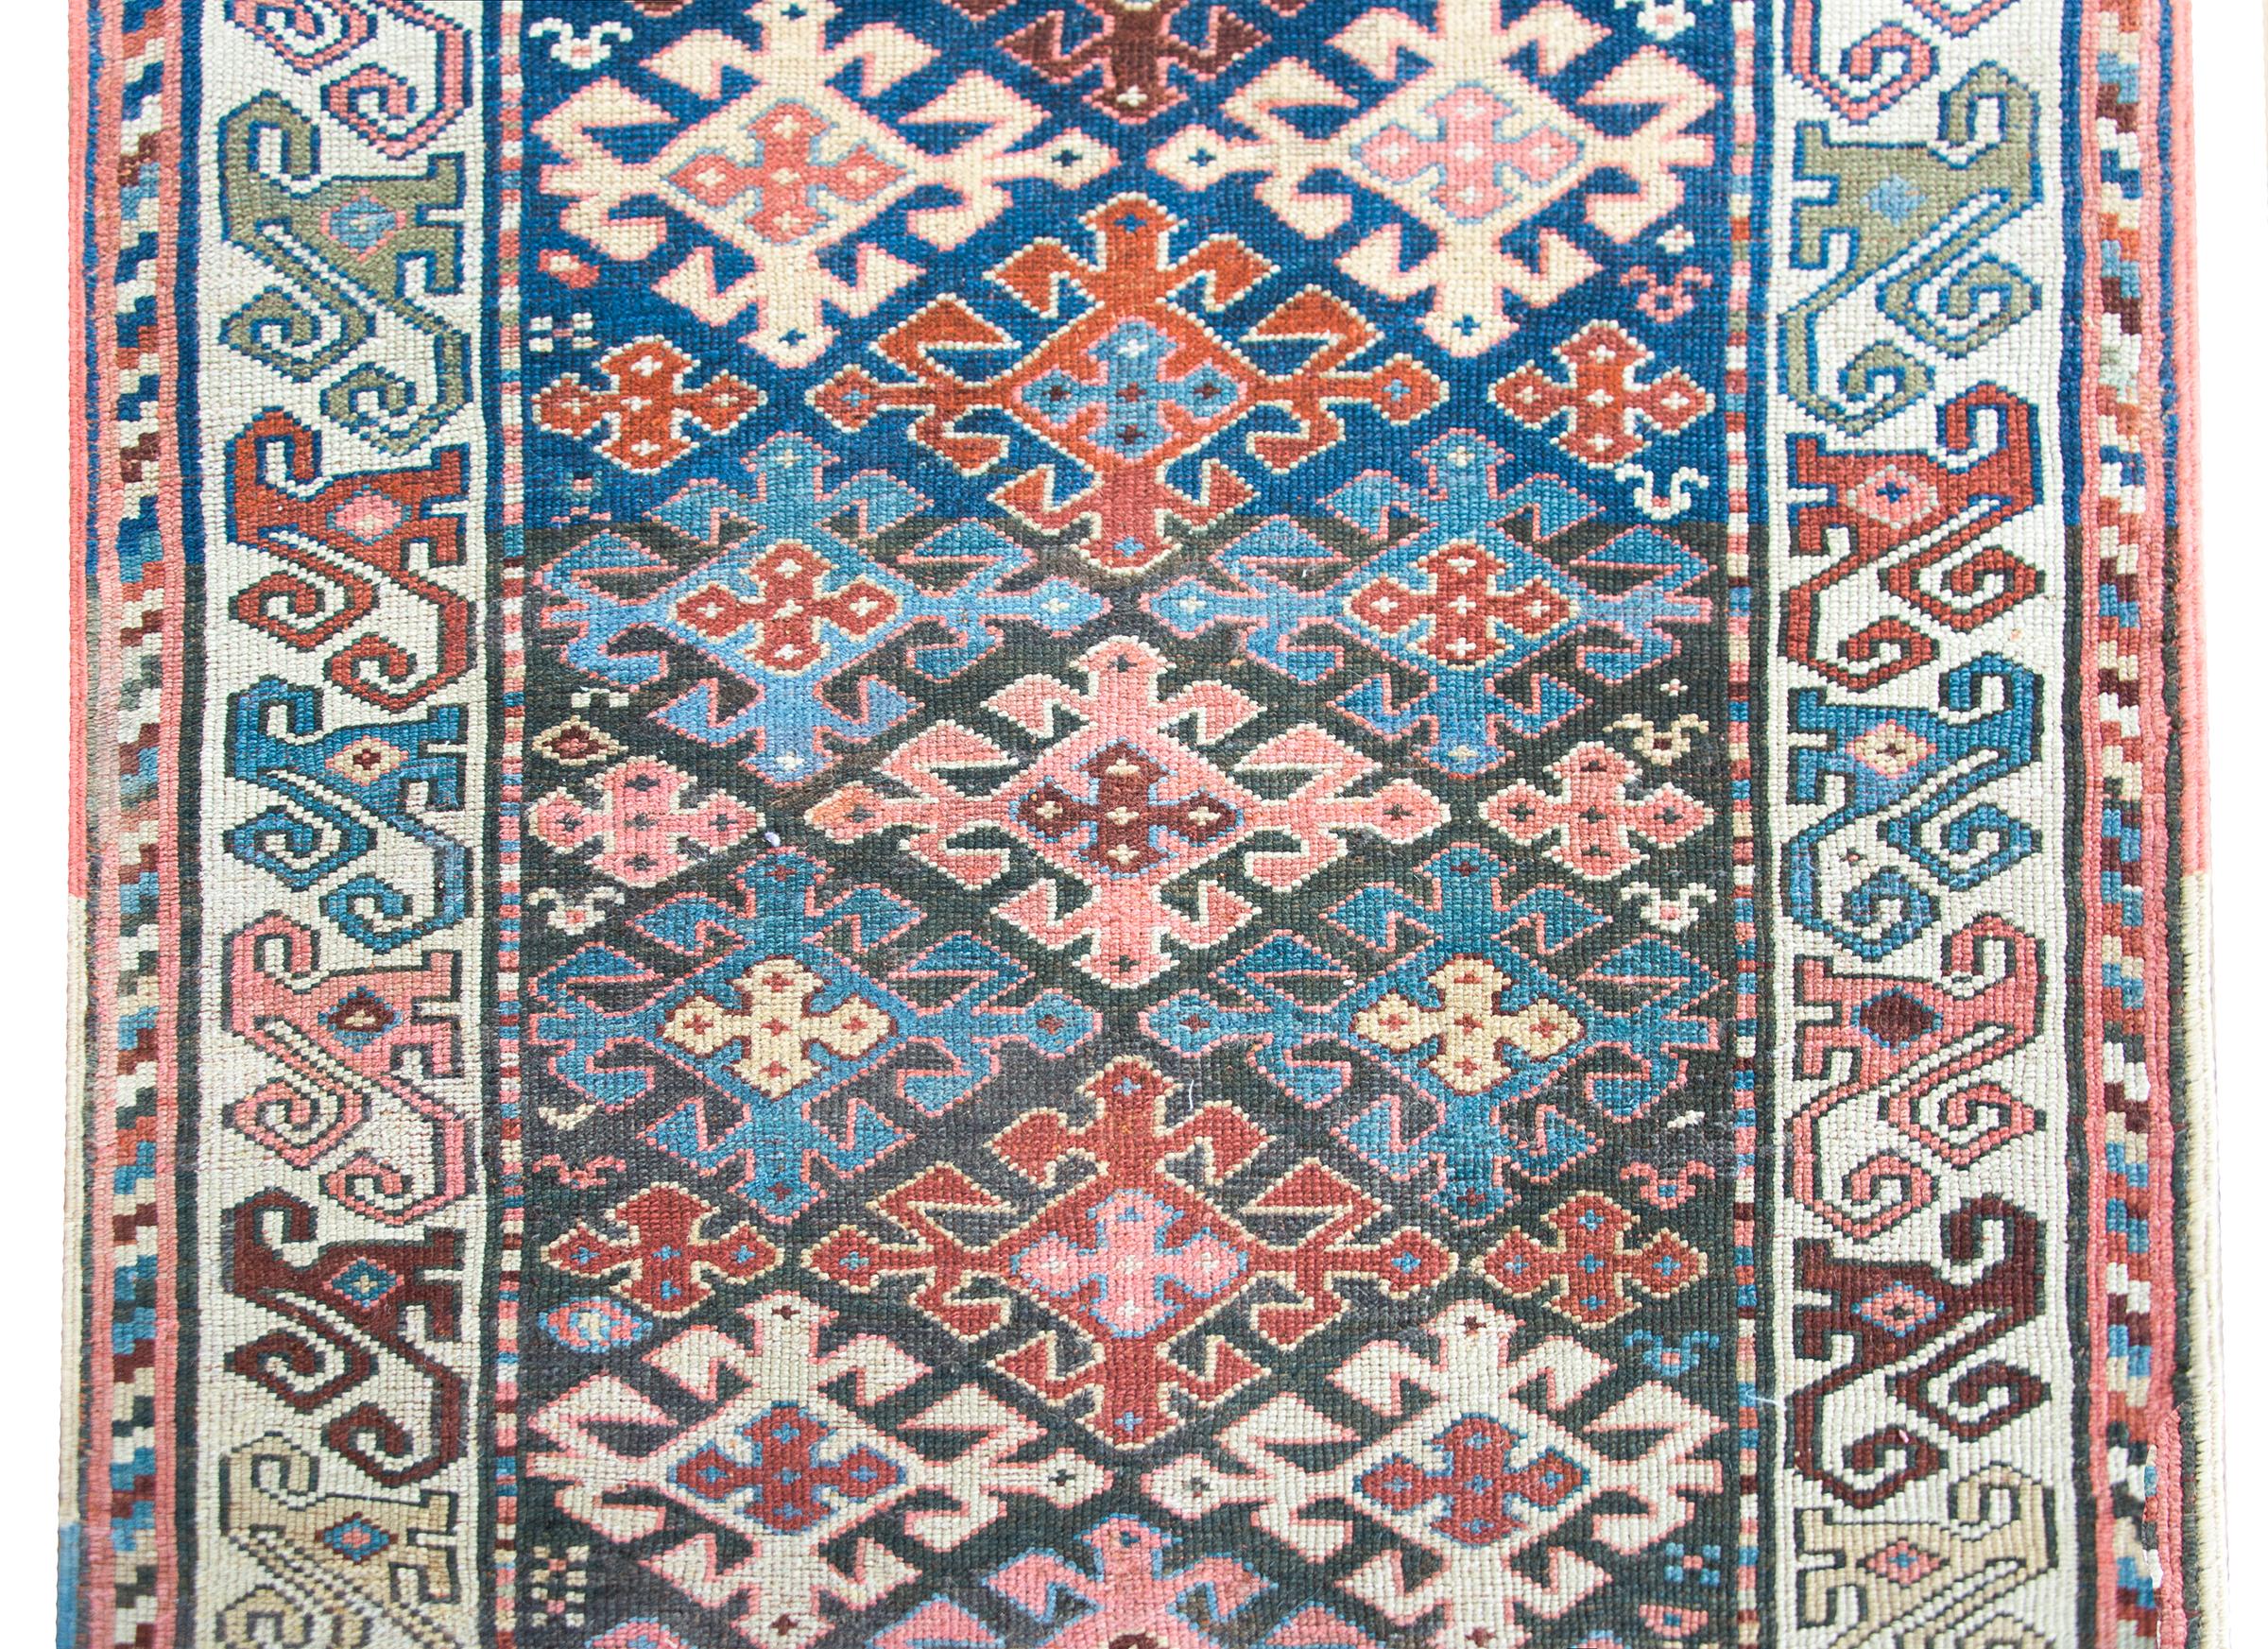 A gorgeous late 19th century Persian Azerbaijani Kazak runner with an all-over stylized floral pattern woven in myriad colors including crimson, cream, pink, indigo, and gold, and all surrounded by a wide border with more stylized floral motifs